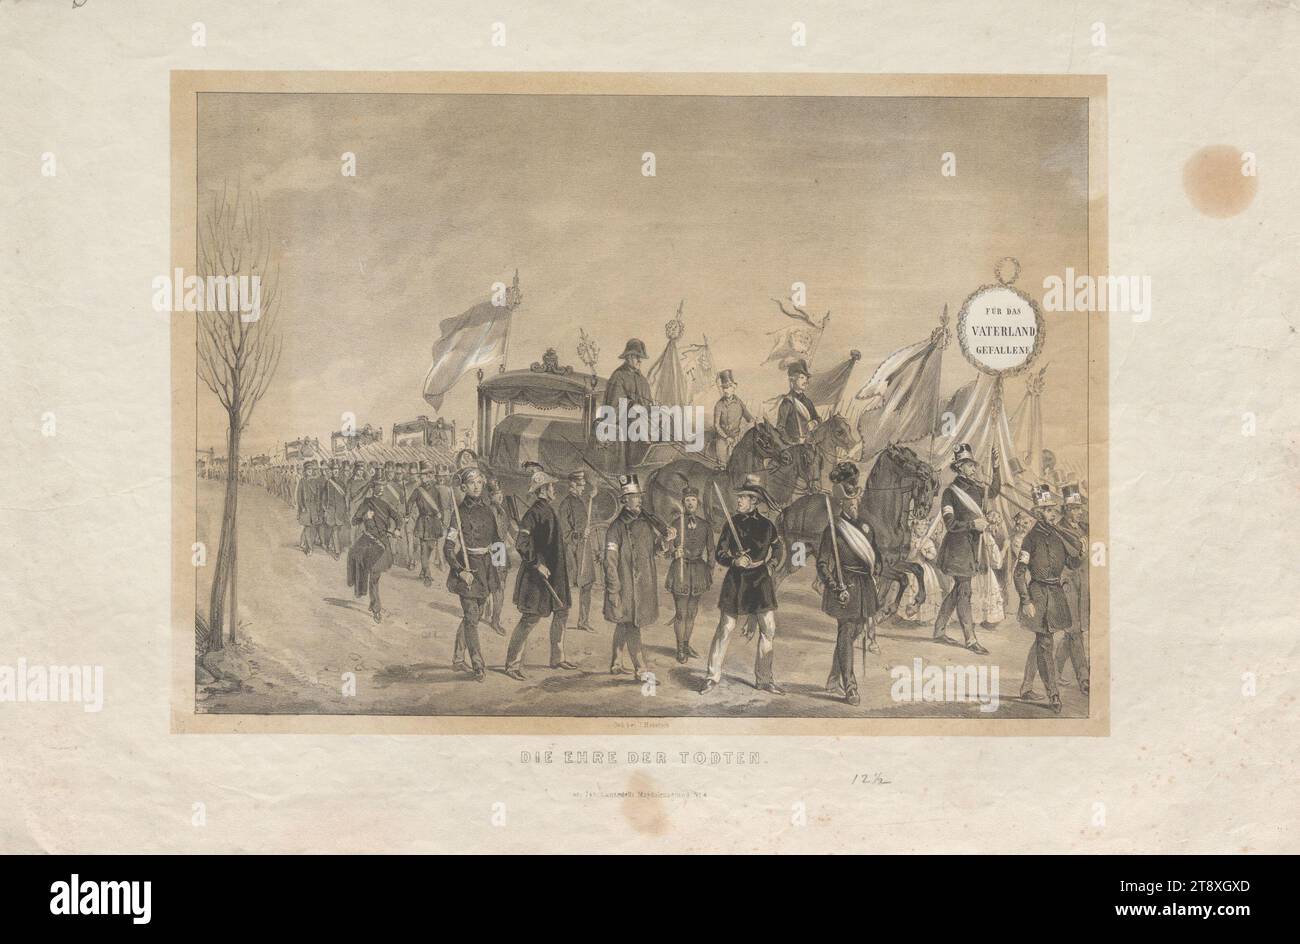 DIE EHRE DER TODTEN.' (Funeral of the March Fallen on March 17, 1848), Johann Lanzedelli, lithographer, Johann Höfelich (1796-1849), Printer, 1848, paper, chalk-manner lithograph, height 34.1 cm, width 52.5 cm, Fine Arts, Revolutions of 1848, 1849, Disease and Death, cortege, funeral procession, public funeral, The Vienna Collection Stock Photo